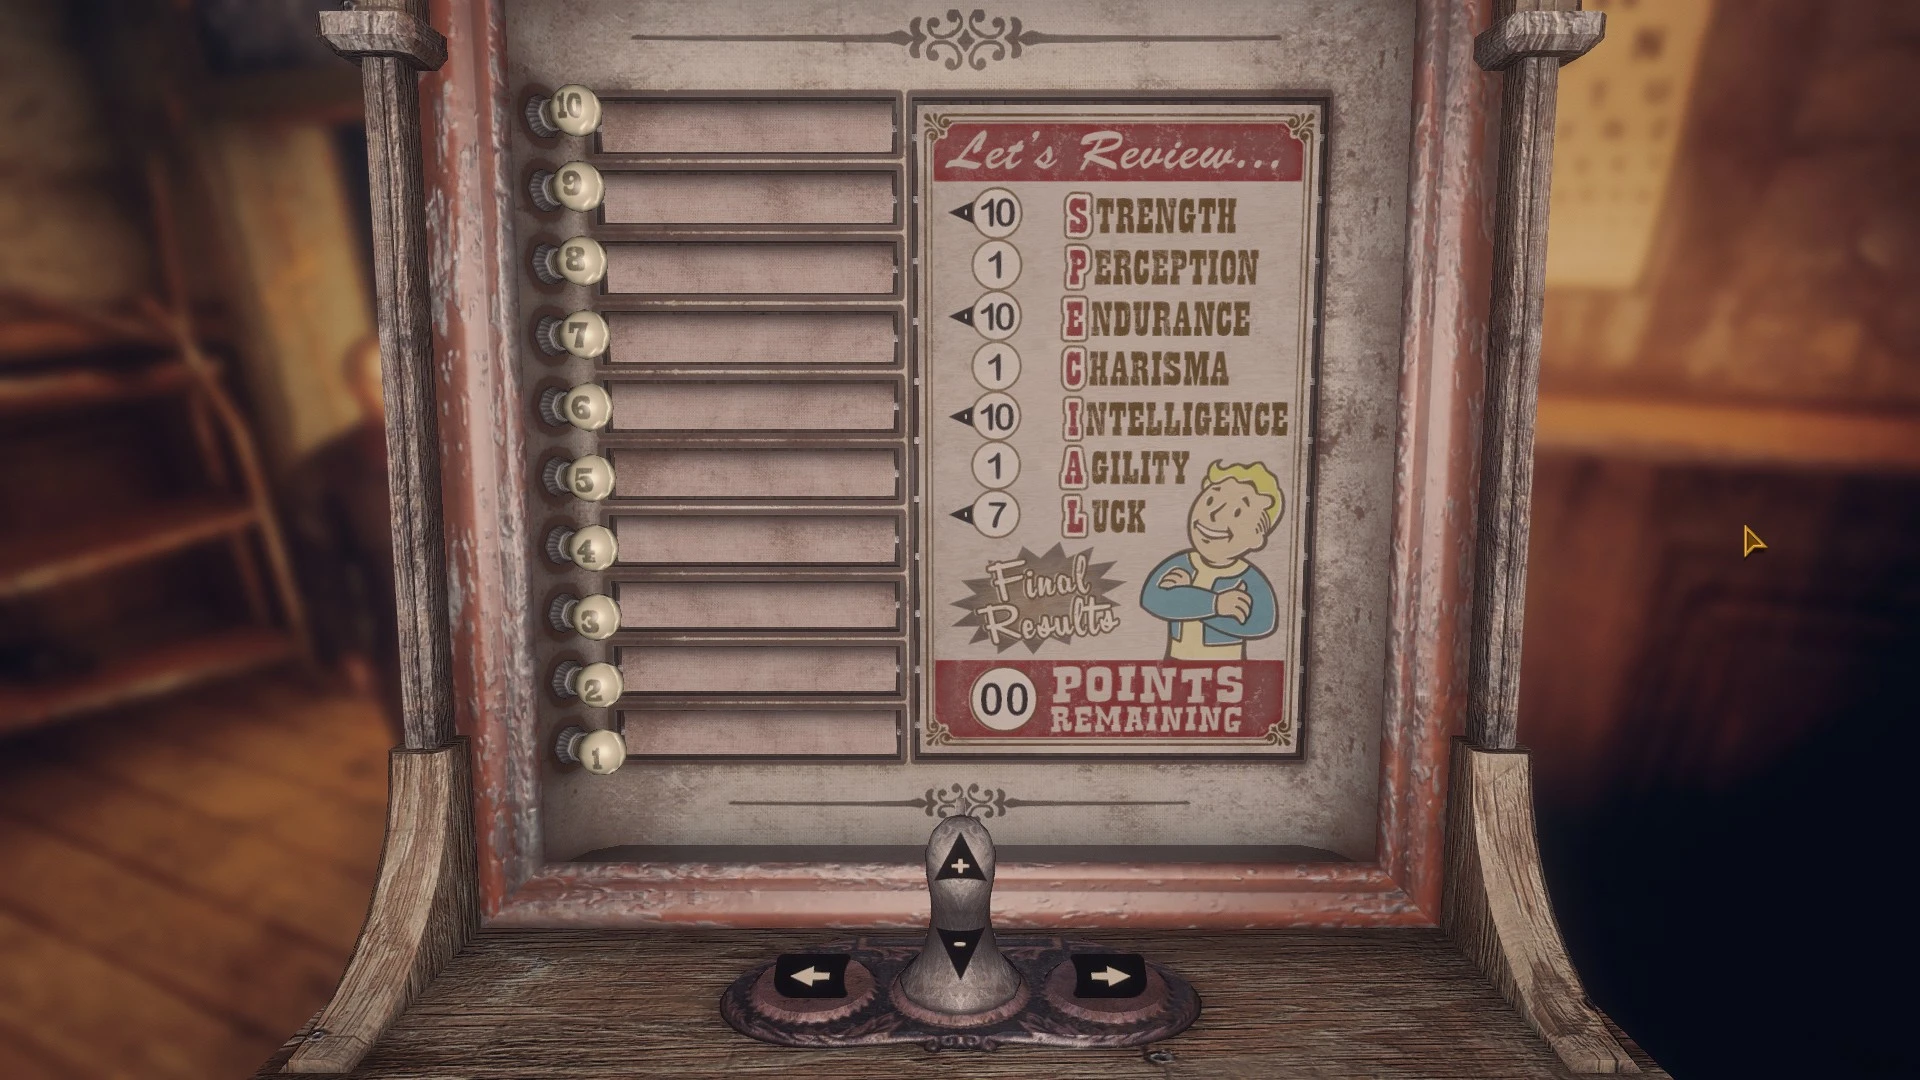 fallout new vegas special stats